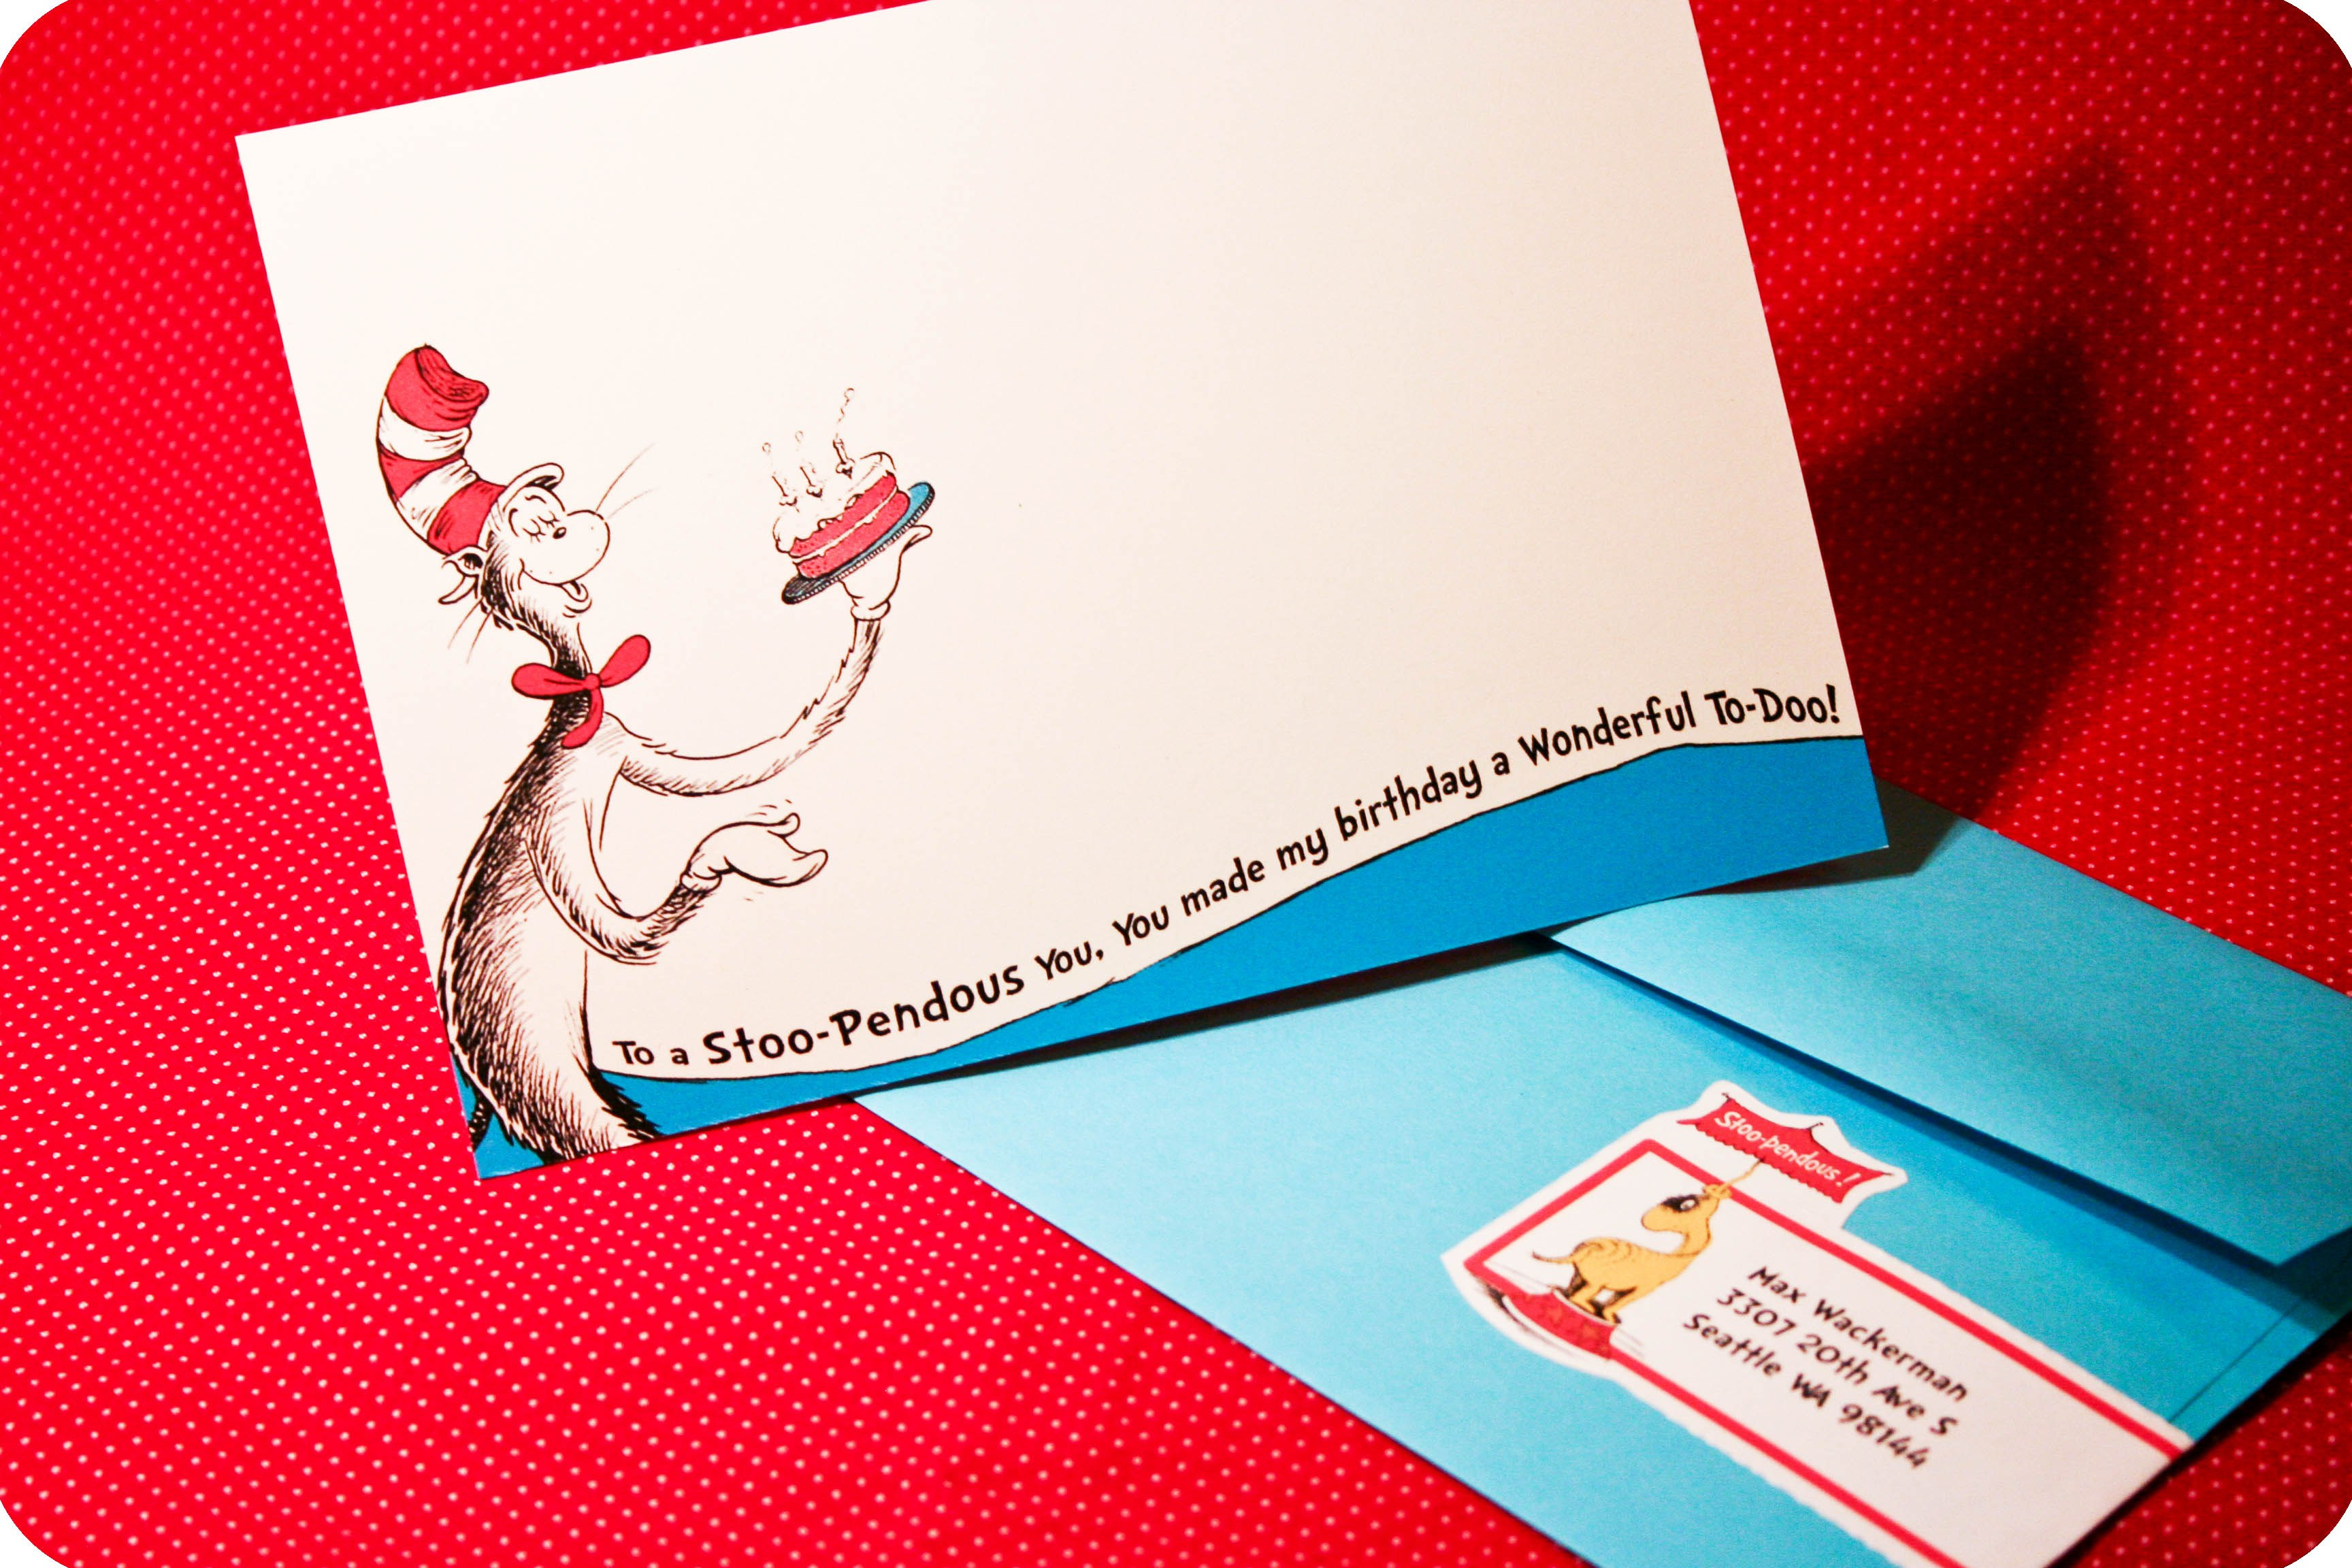 Dr Seuss Party Series Invites – with regard to Dr Seuss Birthday Card Template